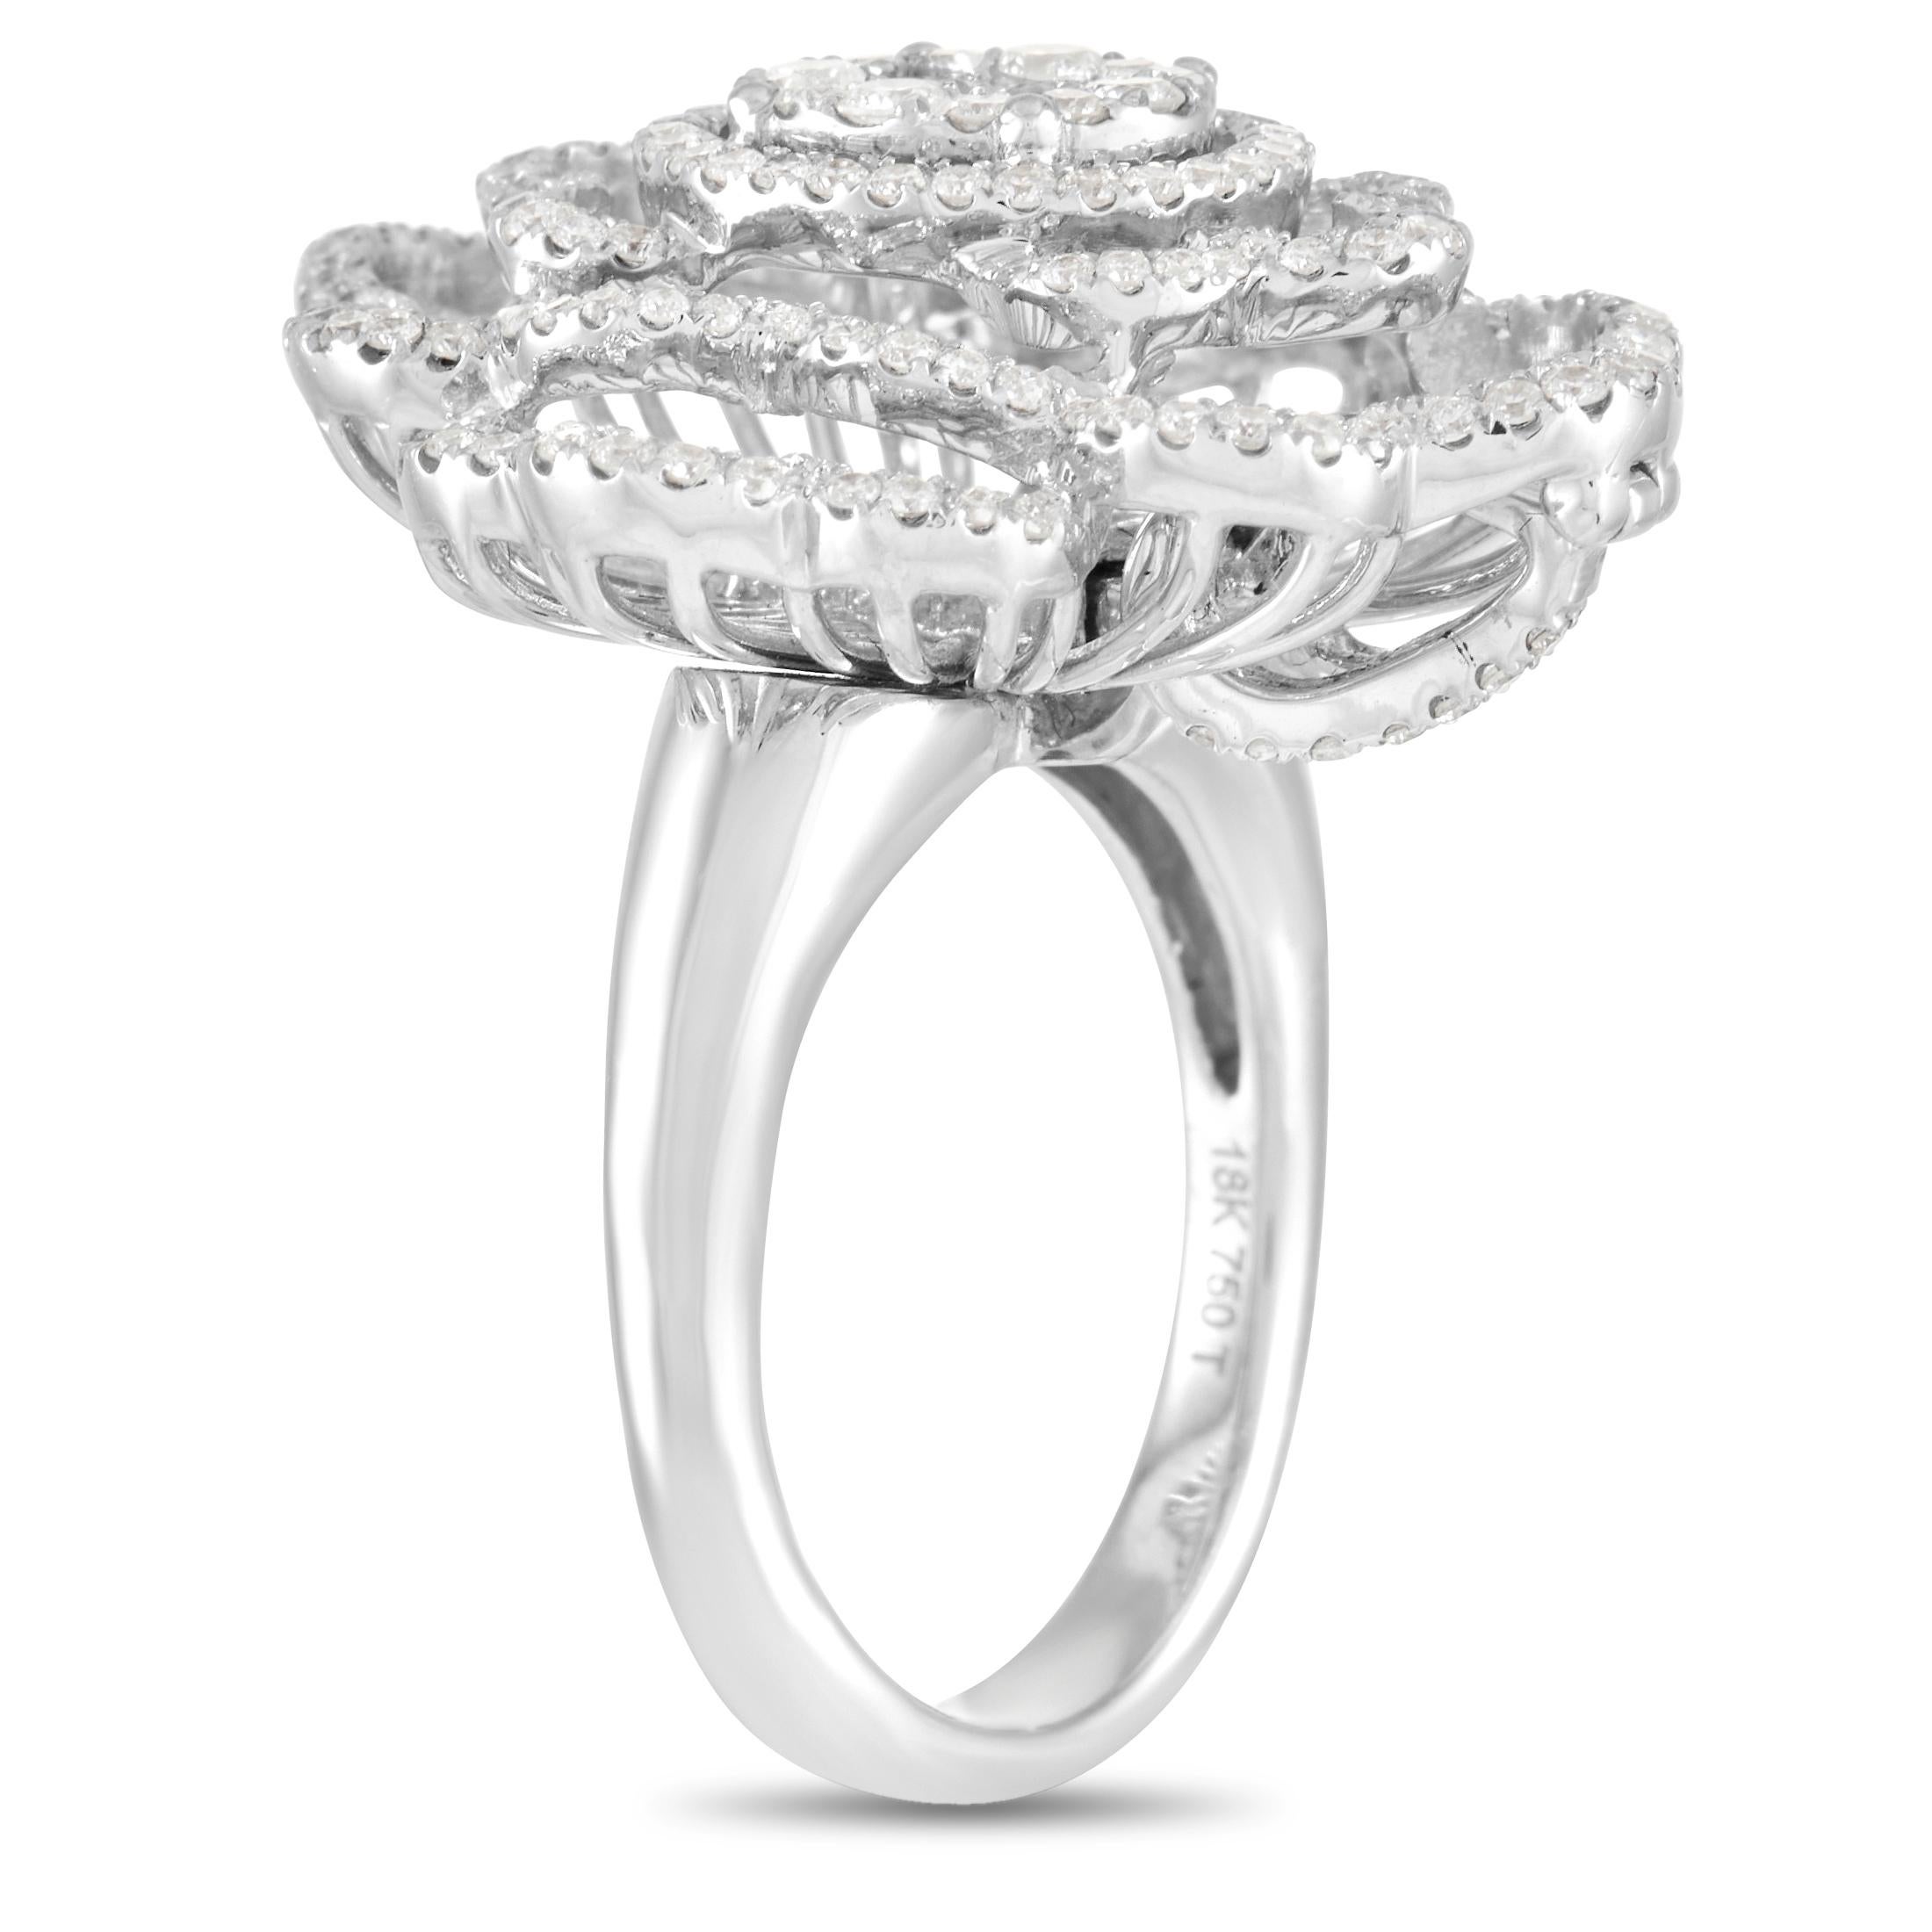 This stunning LB Exclusive 18K White Gold 1.20 ct Diamond Ring was made with 18K White Gold and set with a total of 1.20 carats diamonds. Round diamonds form a unique four layer halo around the center setting of a mixture of round and princess cut